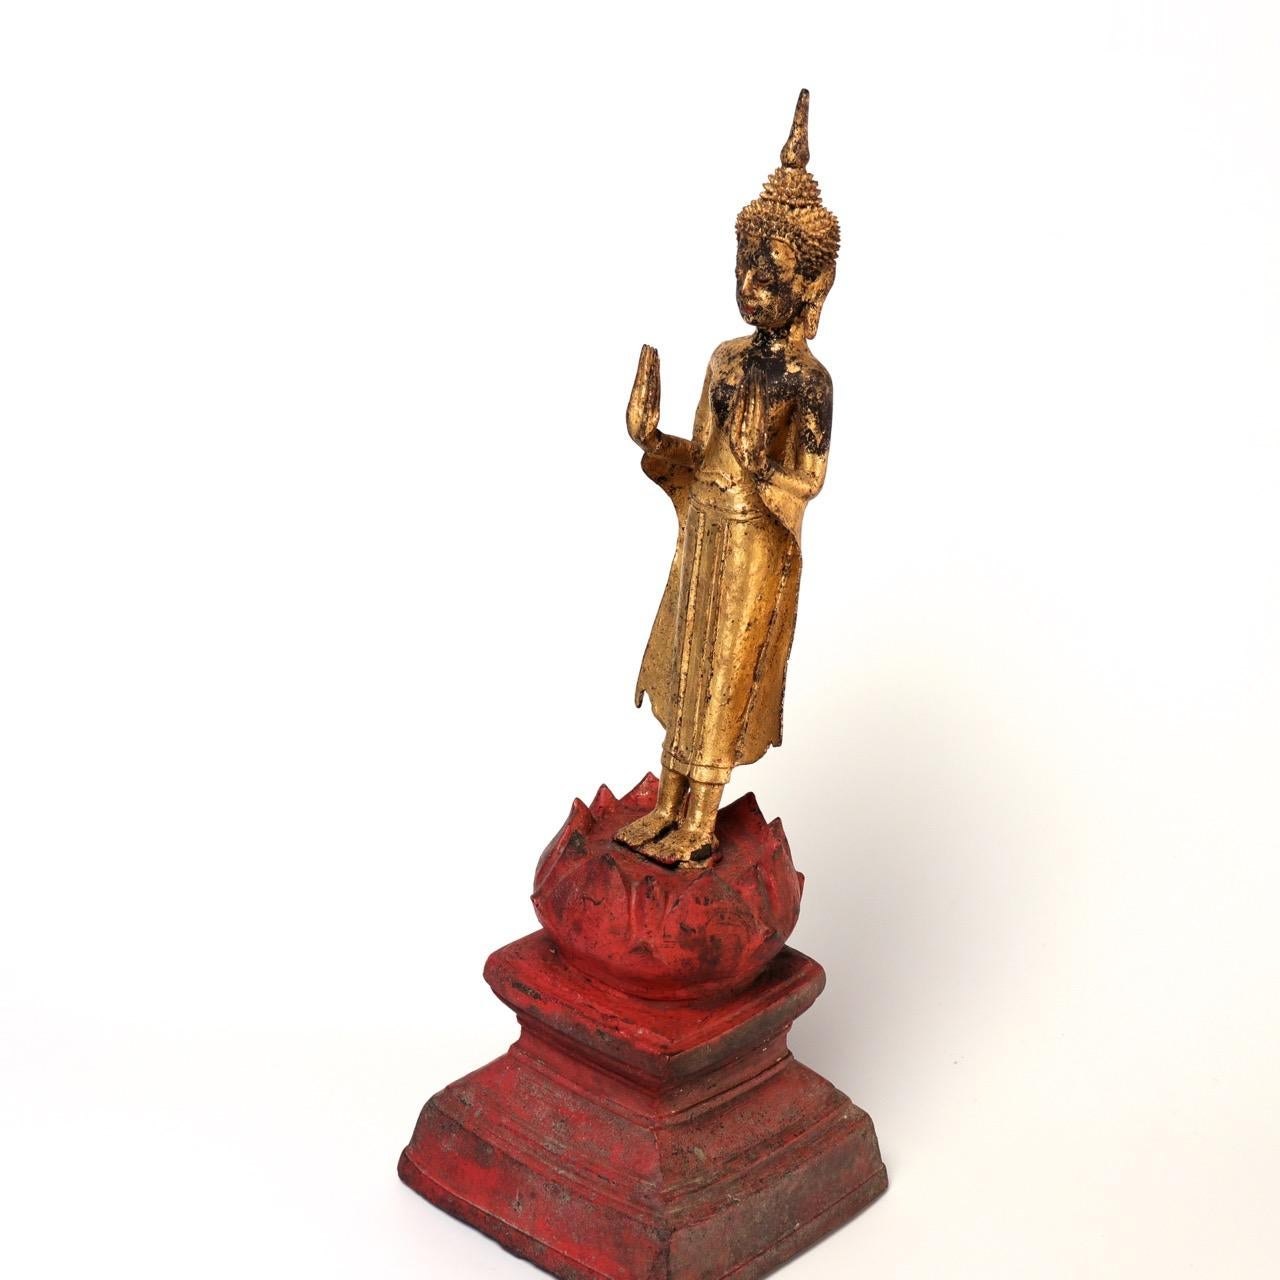 Thai Gilt Bronze figure of a Standing Buddha Image, upright with both hands extended forward and slightly up from the elbow, wrists bent backward, palms face forward with the long elegant tapering fingers reaching towards the heavens, exaggerating